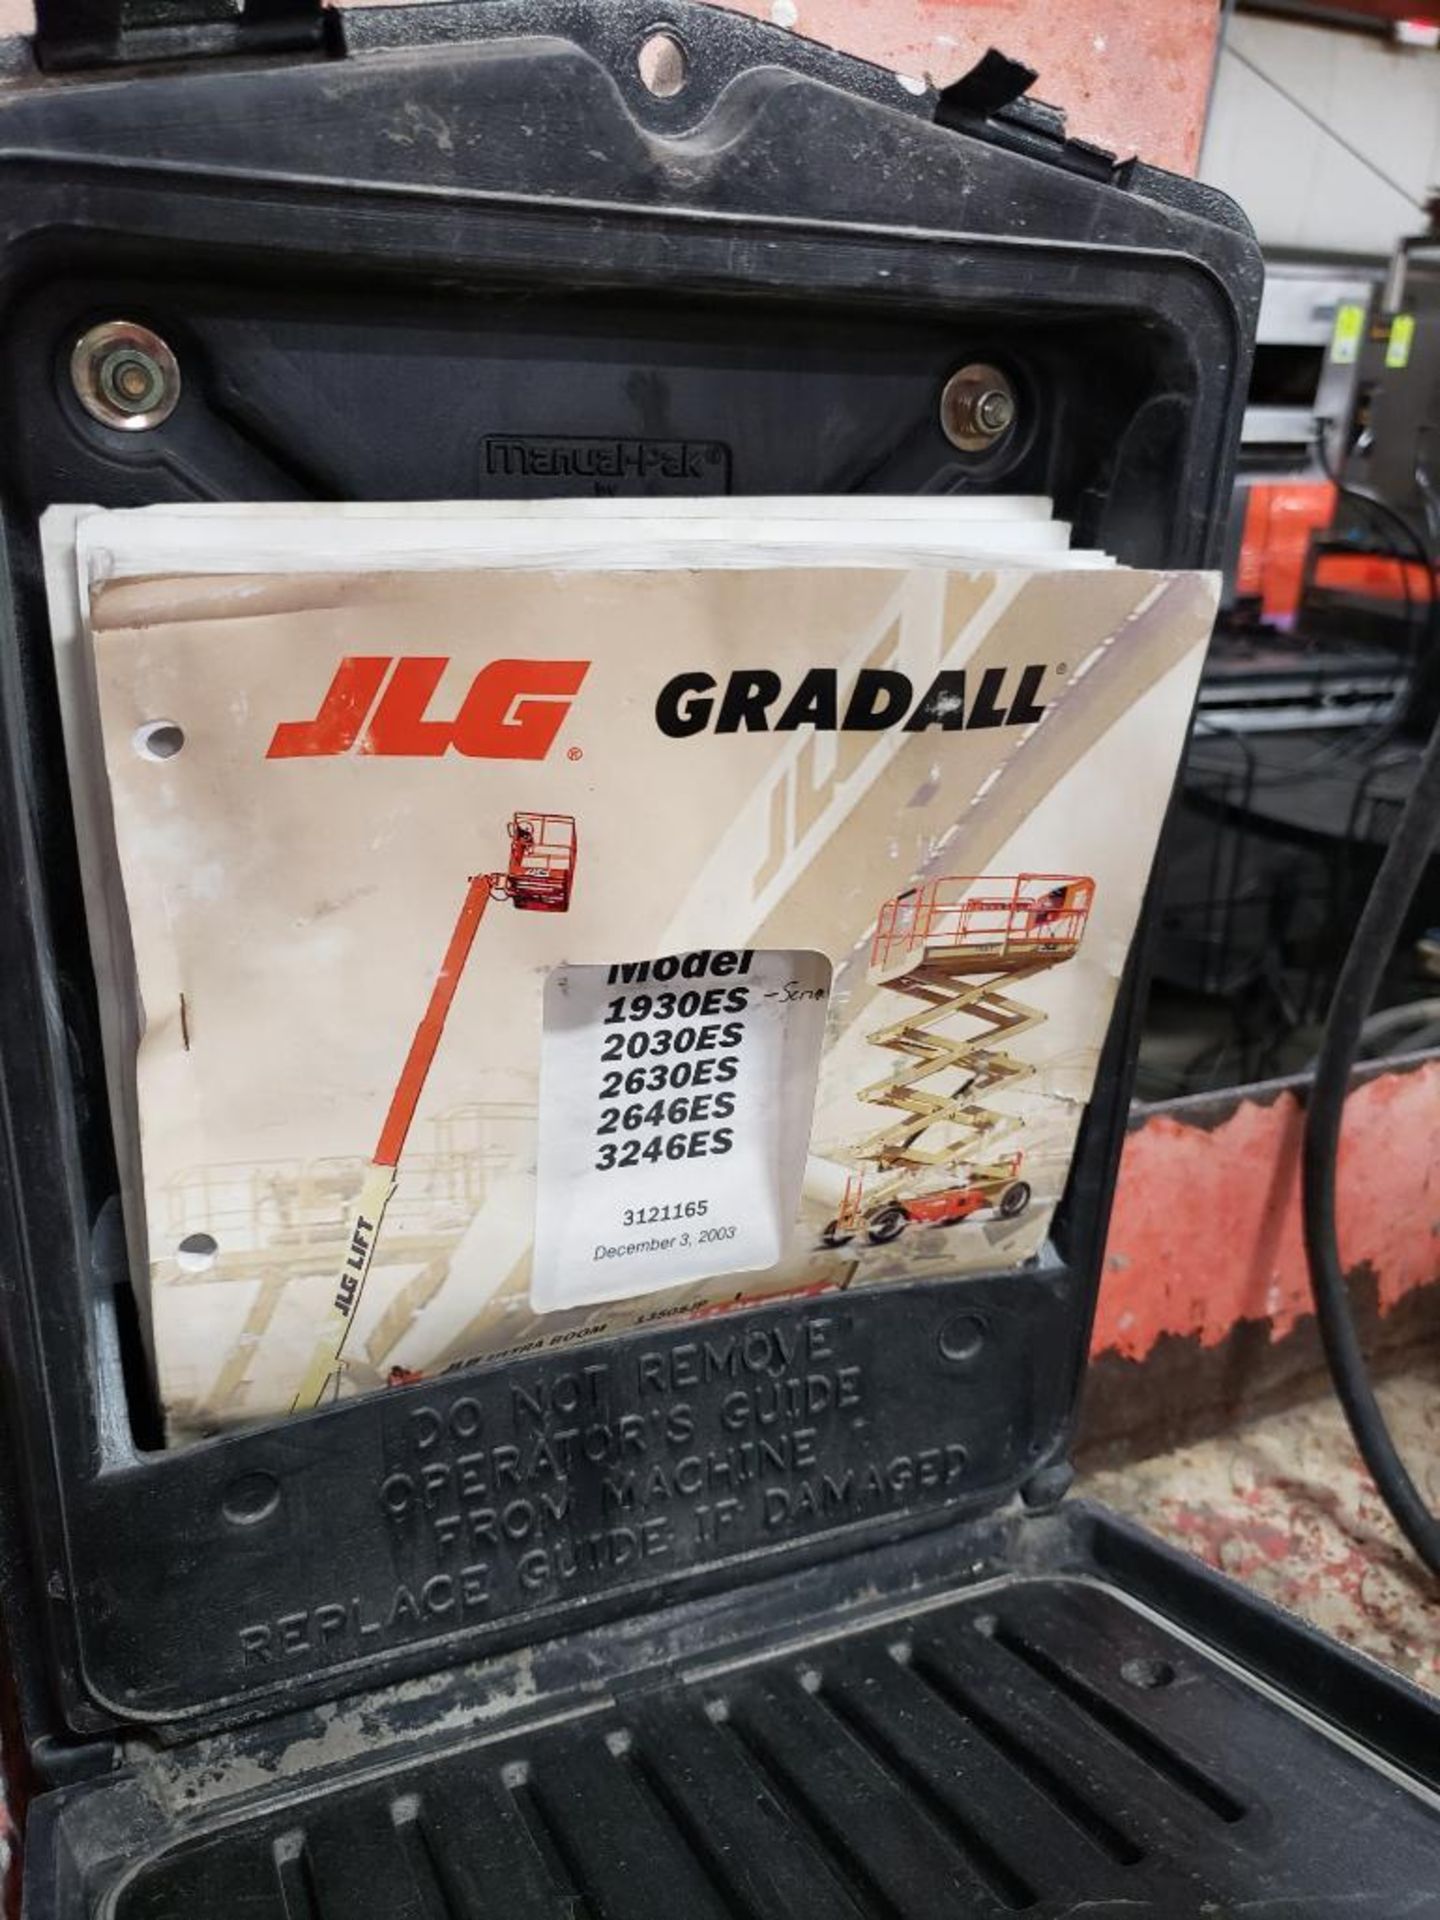 JLG Industries 2632E2 electric scissor lift. 26' lift 32" wide. YR 2003. Serial number 0200II2300. - Image 9 of 19